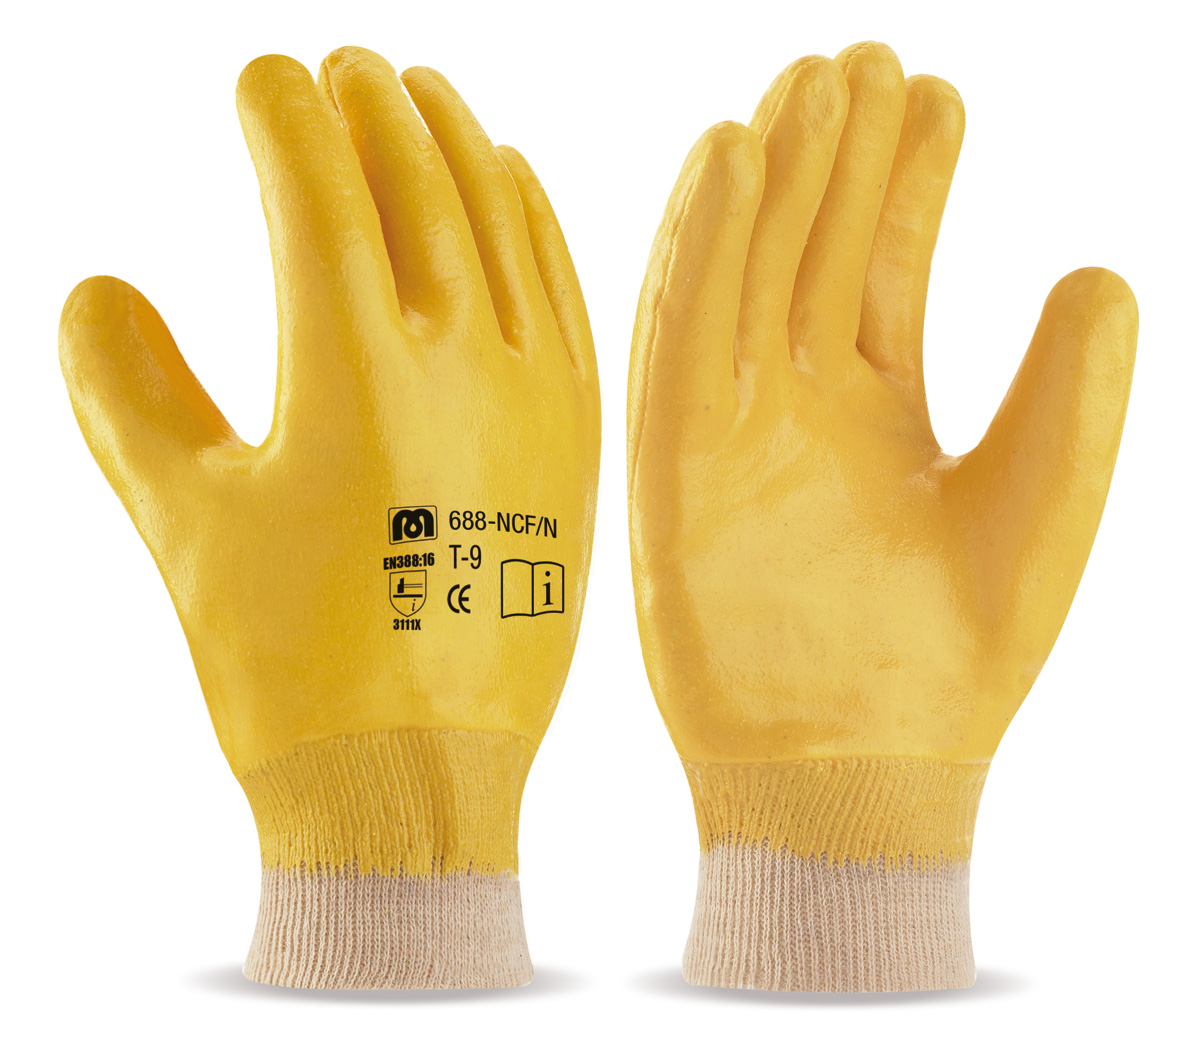 688-NCF/N Work Gloves Nitrile With Support  Covered back. Flexible Nitrile Glove with knitted cotton support with elastic cuff.